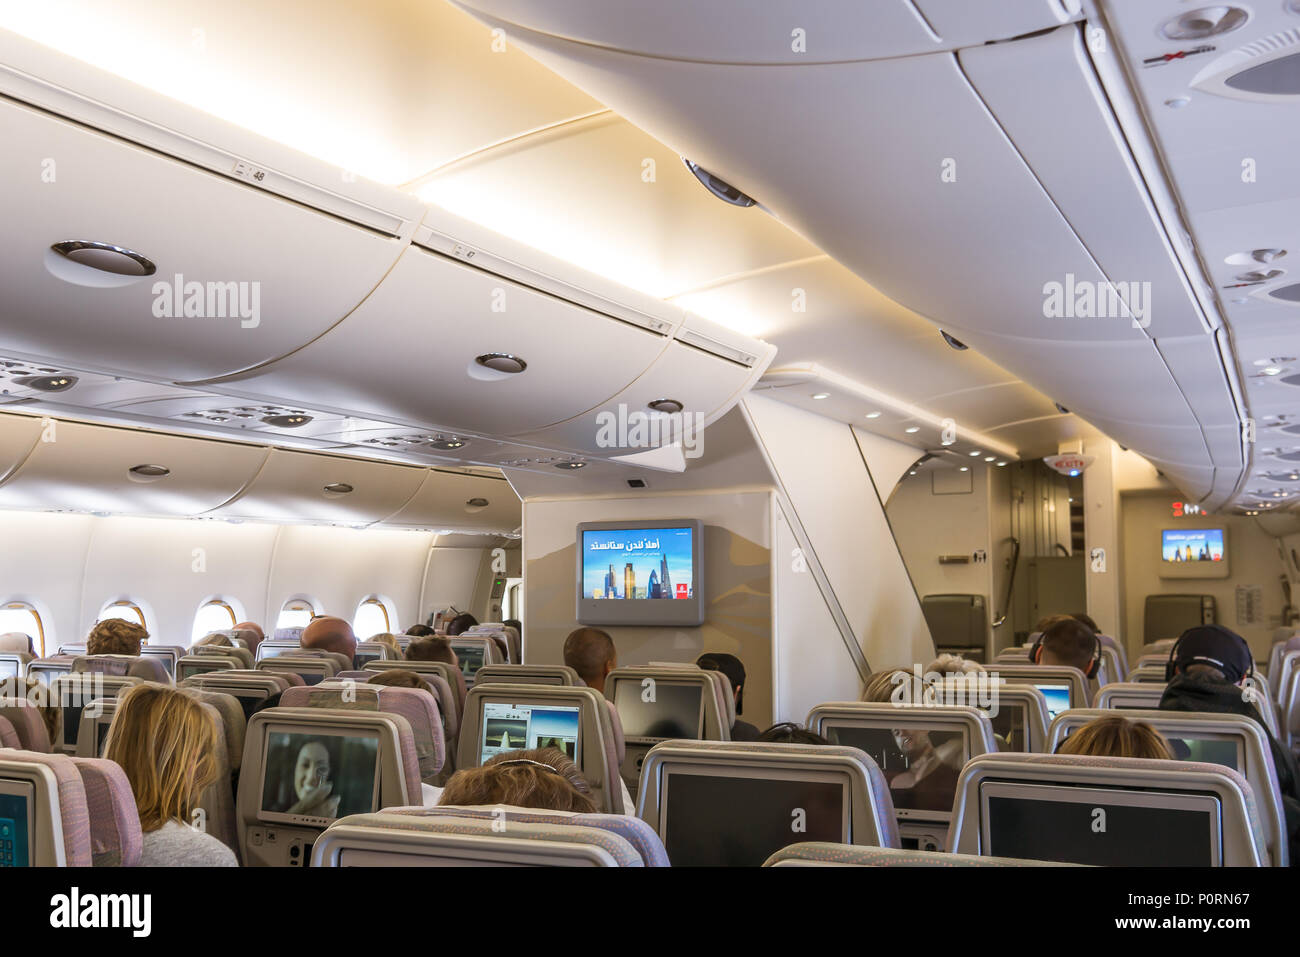 The lower deck of Airbus A 380, a double-deck jet airliner with excellent comfort and space, Copenhagen, April 27, 2018 Stock Photo